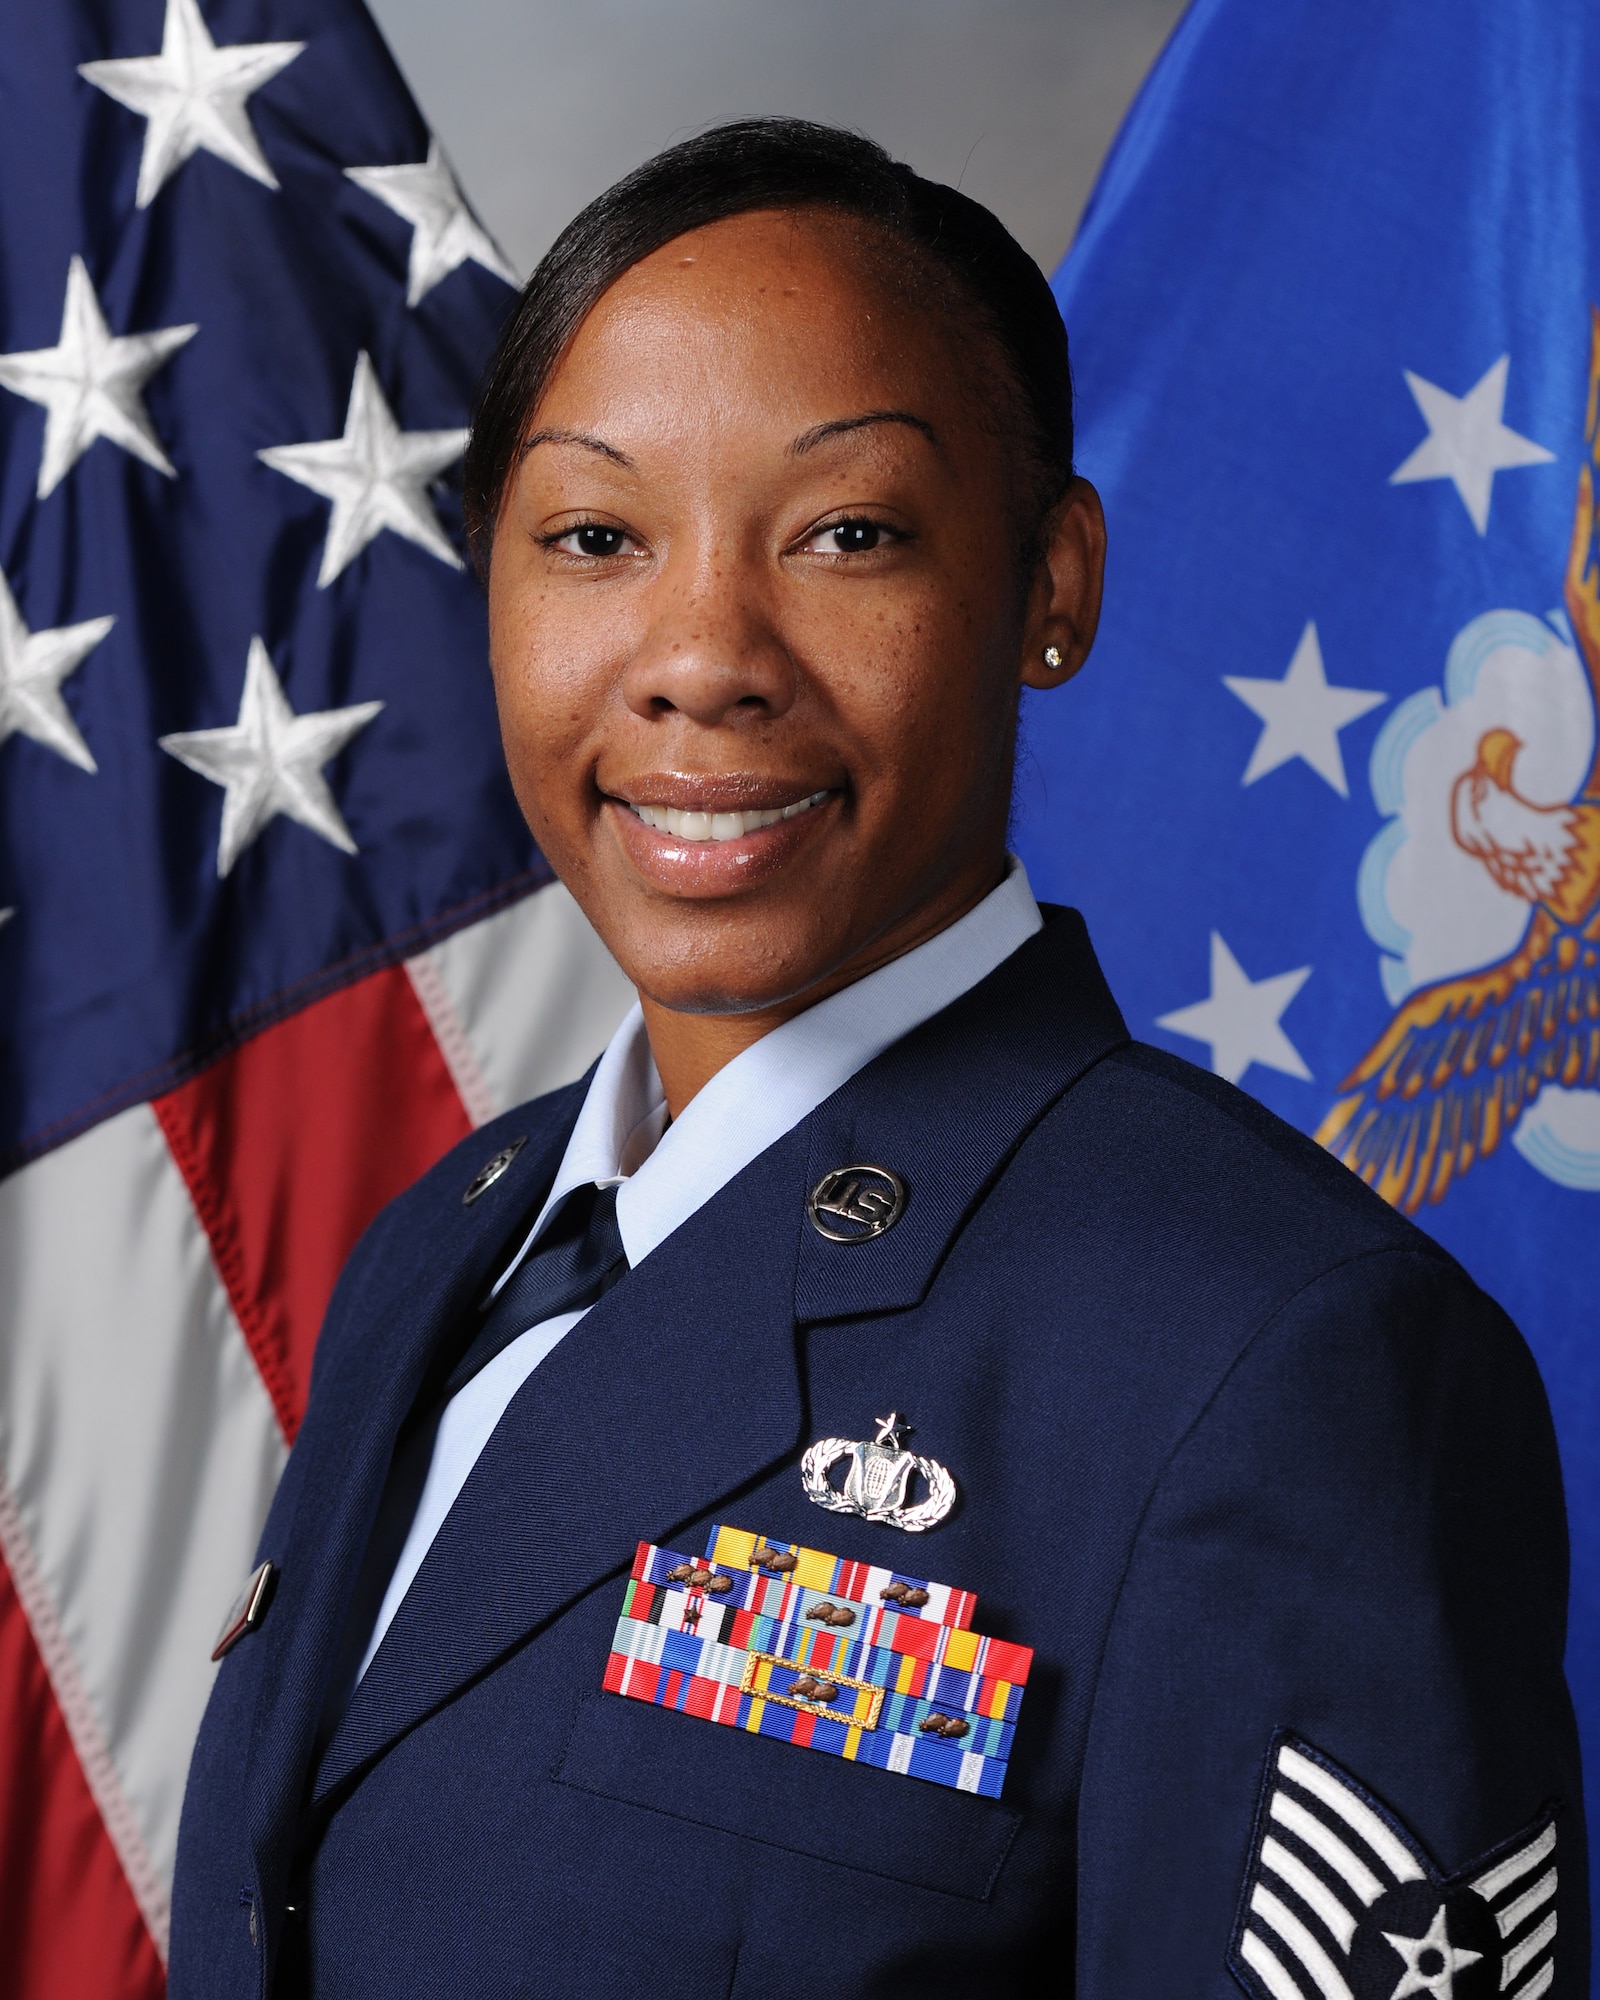 Tech. Sgt. Davina Tunstall will represent Air Force Special Operations Command in competition for the National Image, Inc. Meritorious Service Award.